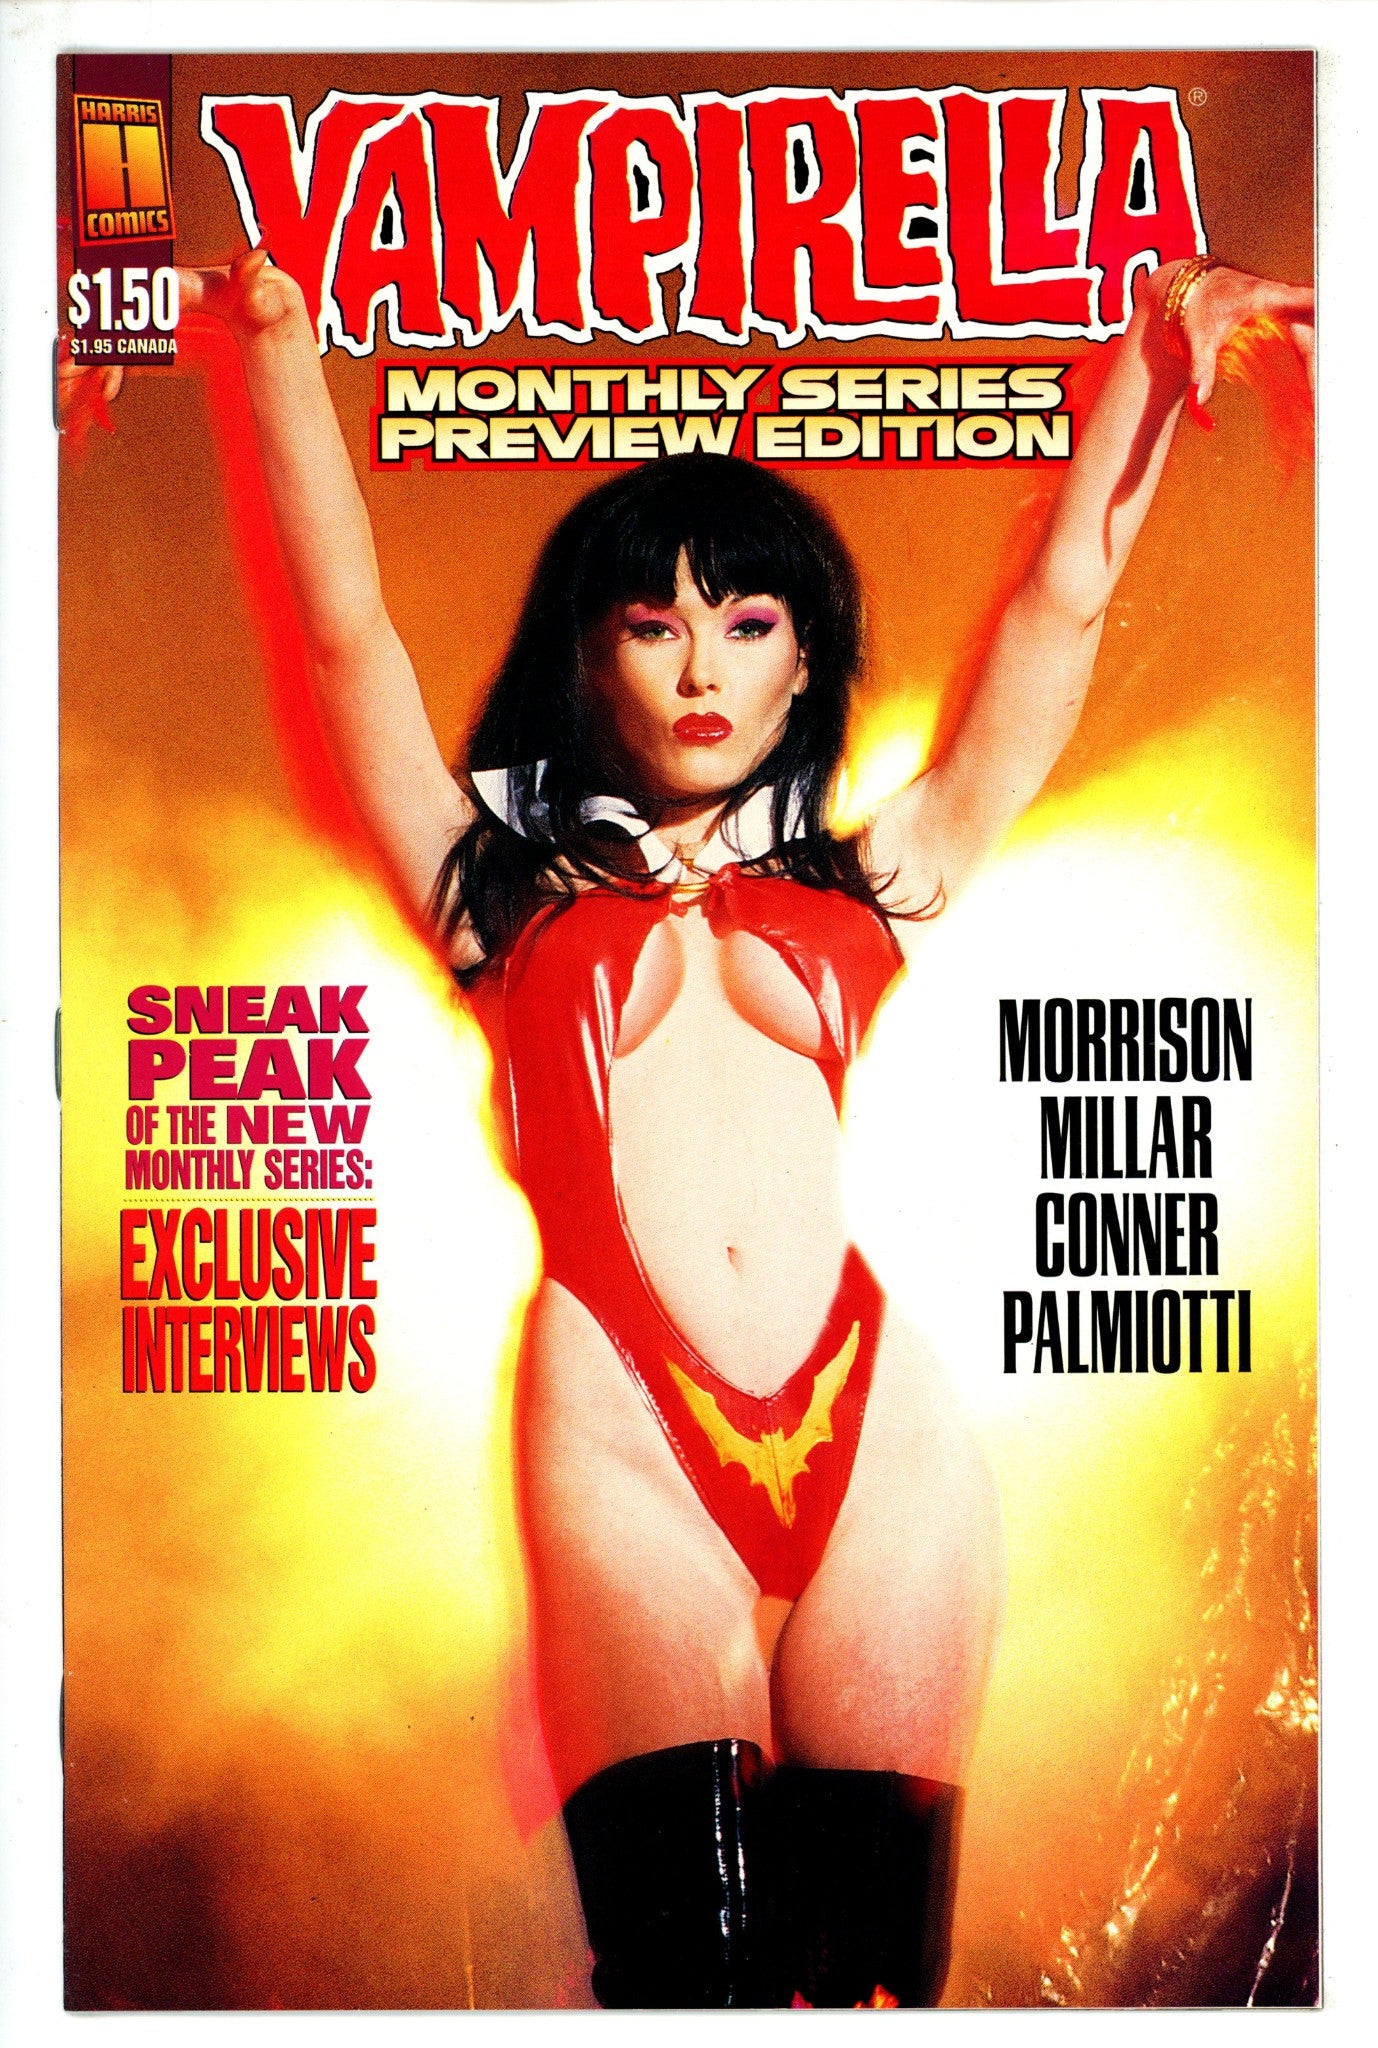 Vampirella Monthly Series Preview 1 NM- (1997)